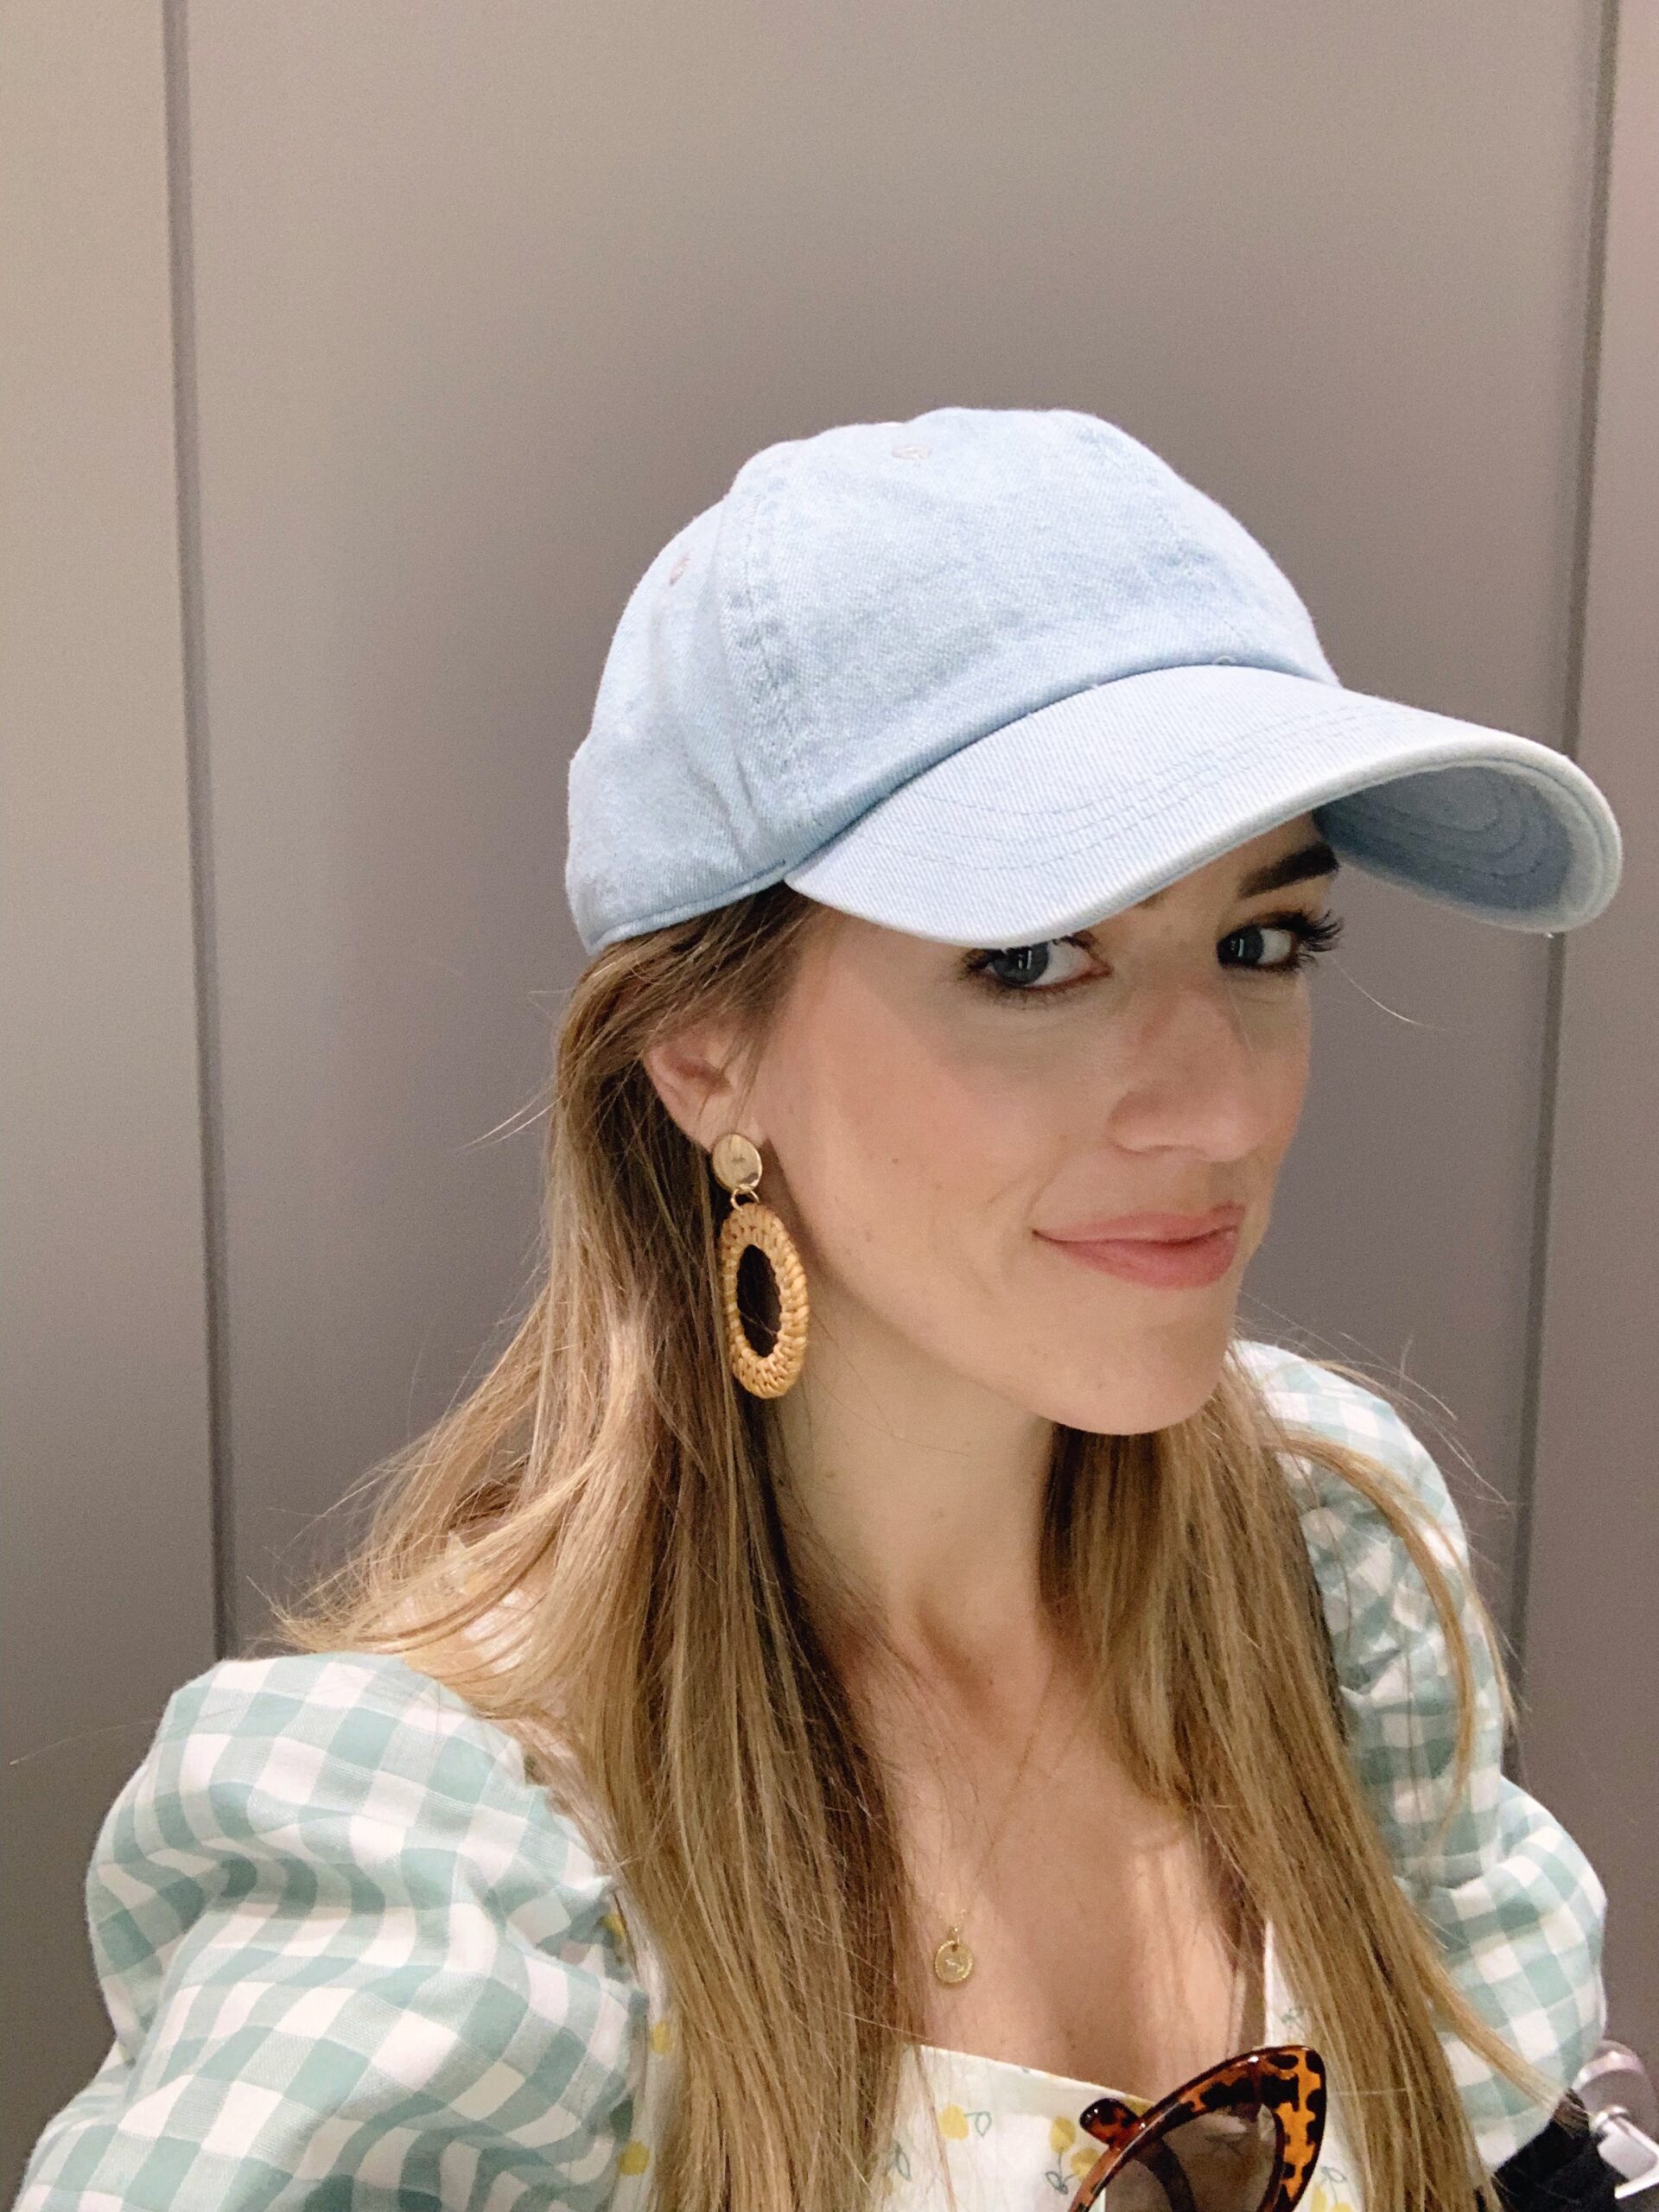 Such a cute take on a baseball cap that you could wear with so many things. Perfect to cover a bad hair day and its only $10.